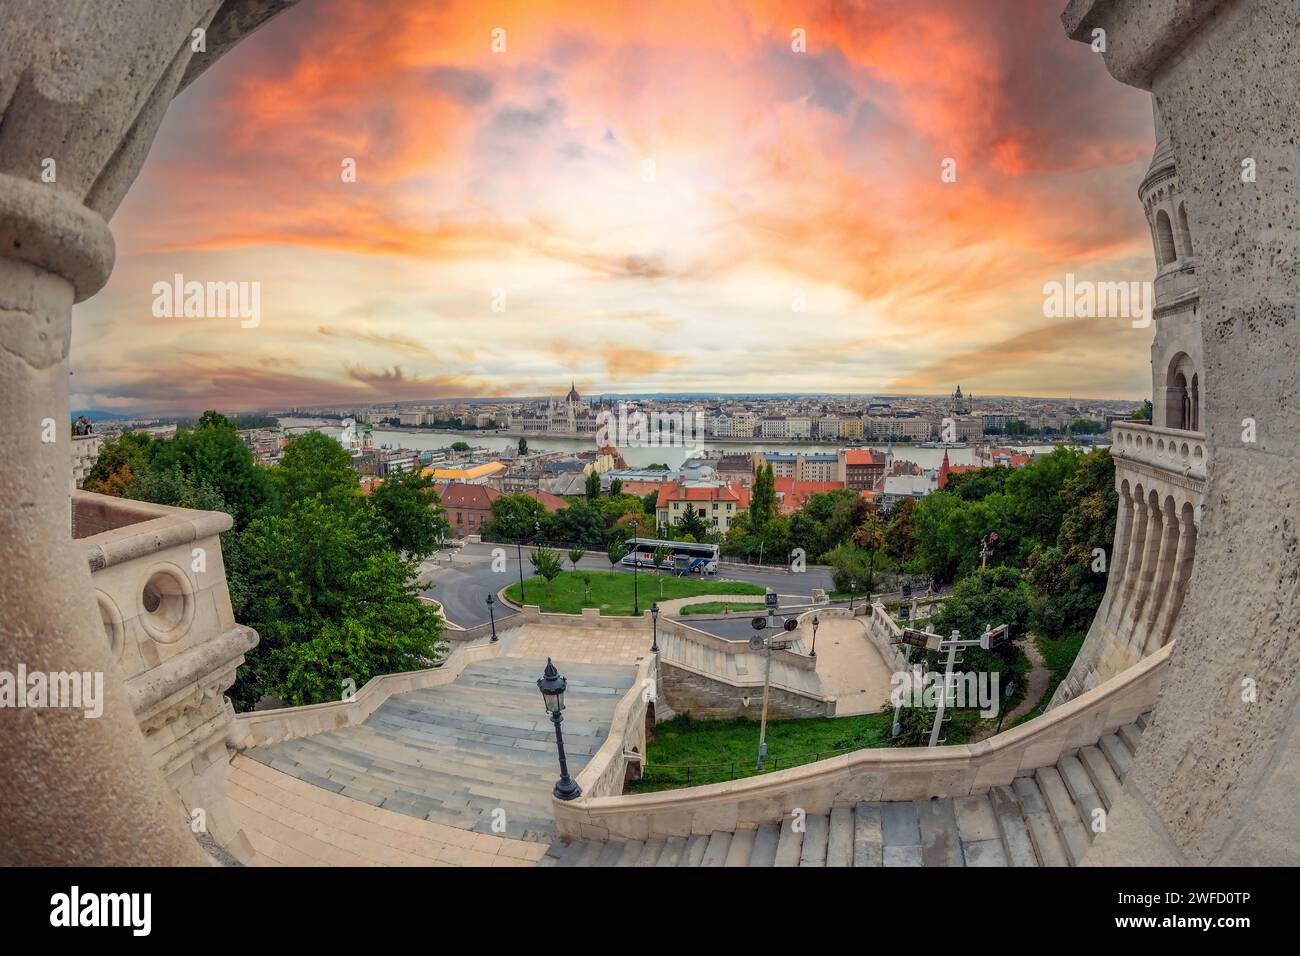 BUDAPEST, HUNGARY - AUGUST 23, 2021: View from the Fisherman's Bastion. Designed and built between 1895 and 1902 on the plans of Frigyes Schulek. Stock Photo